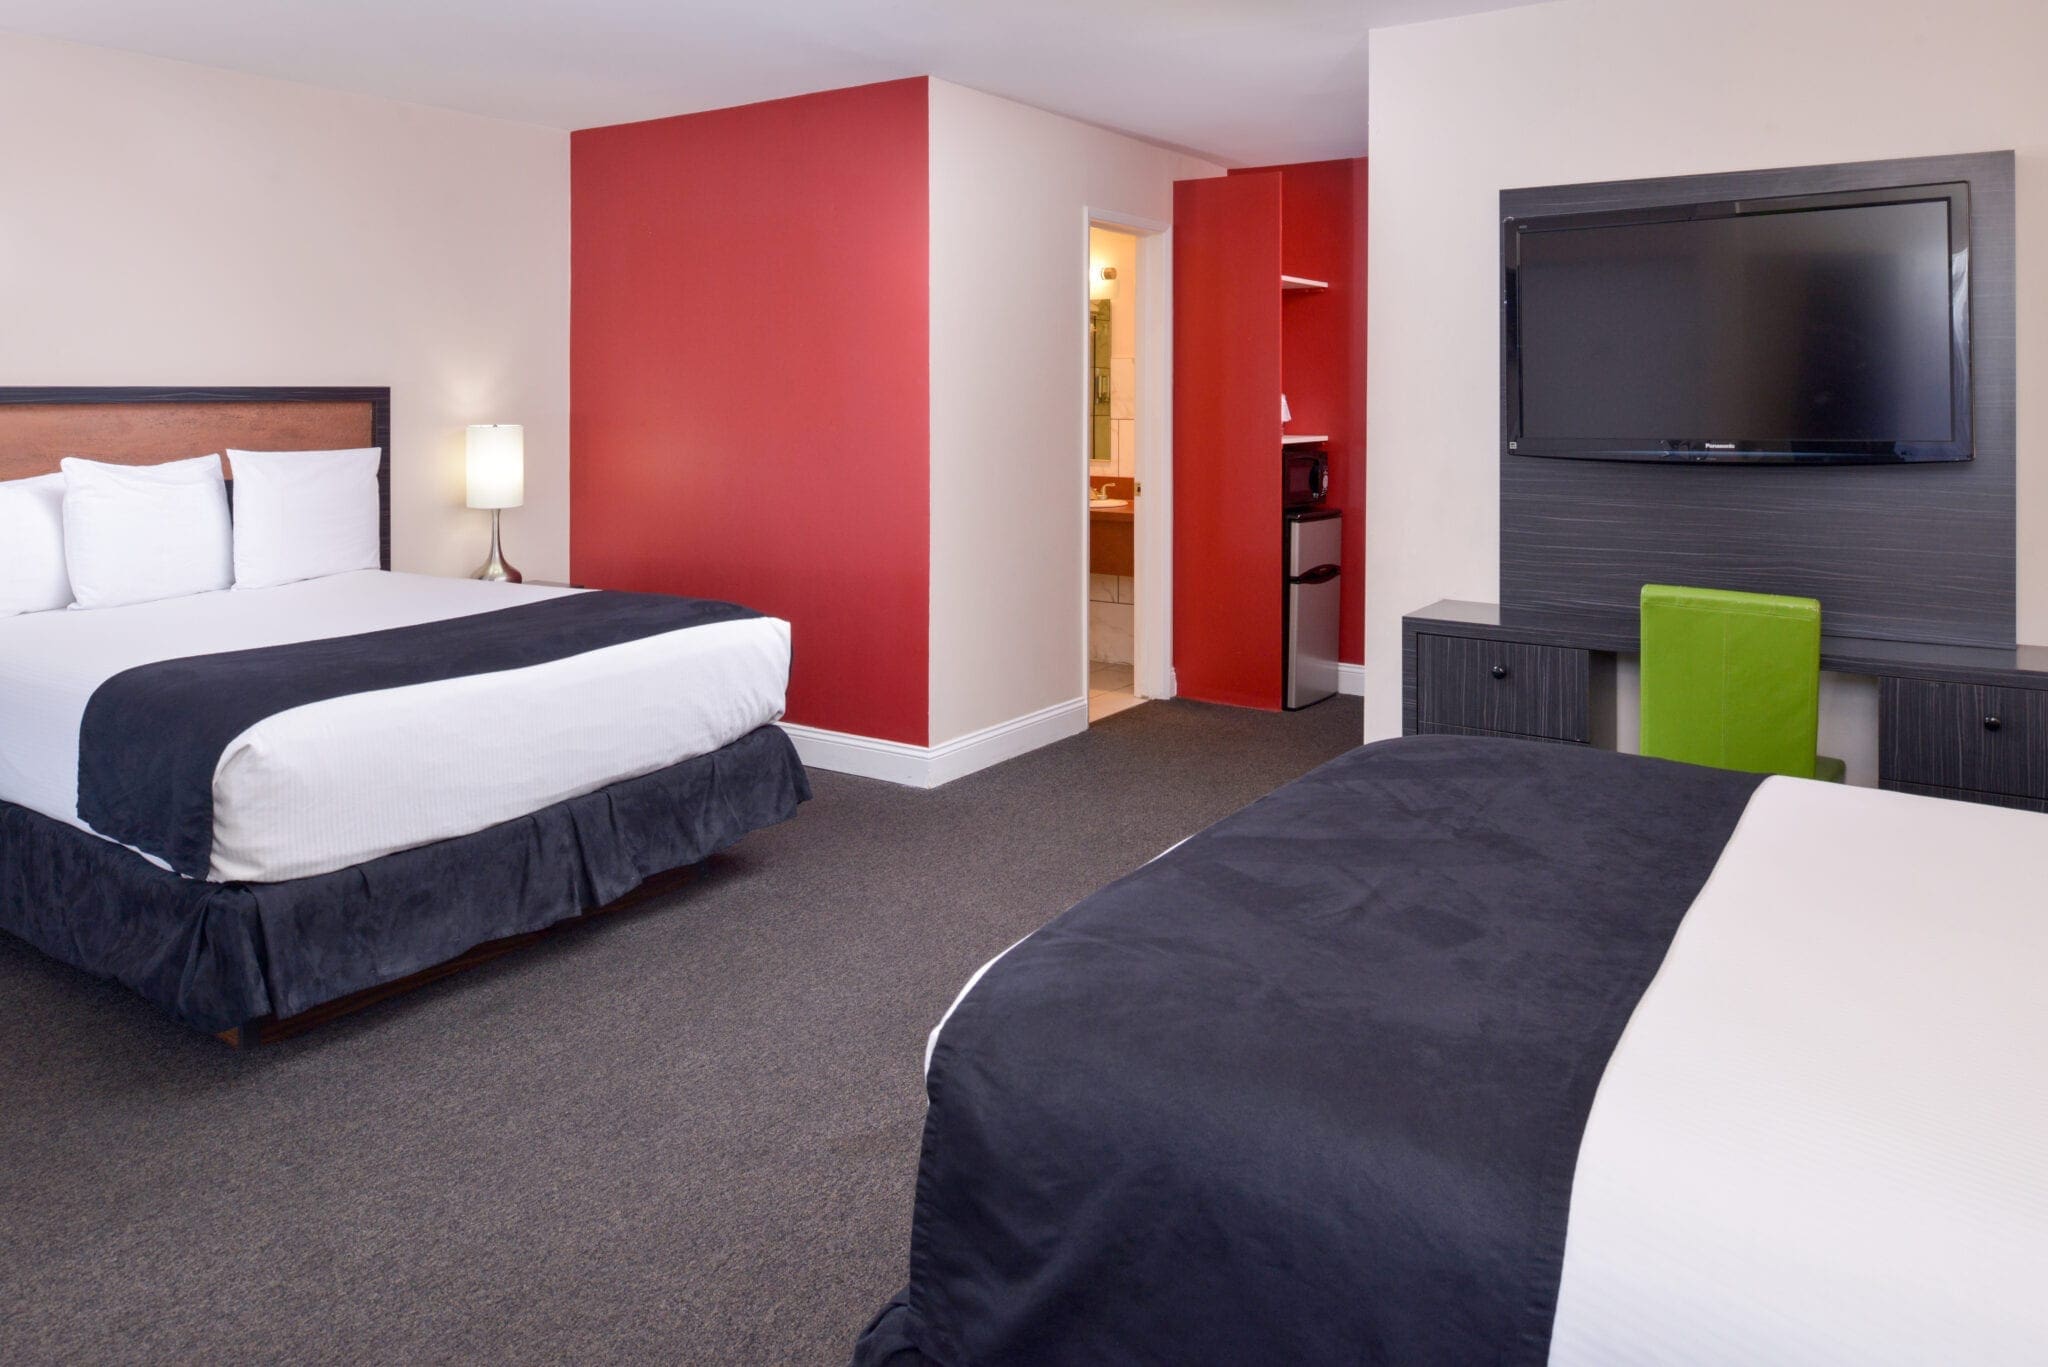 Our Premium Double Queen room features two queen-size beds and will accommodate up to 4 adults.